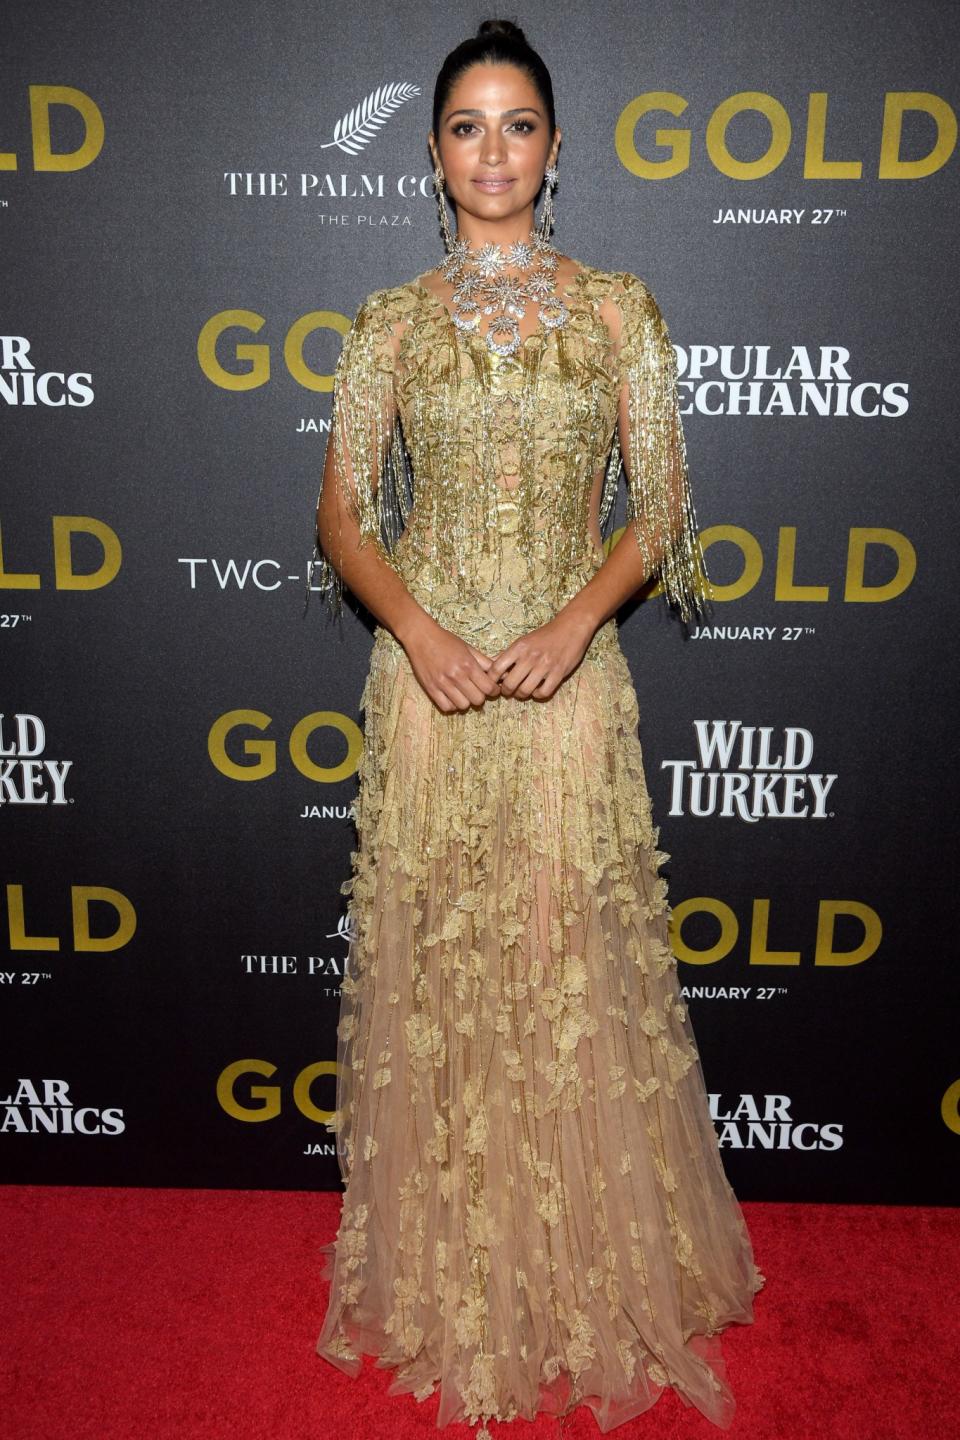 HIT: Camila Alves at the Gold premiere